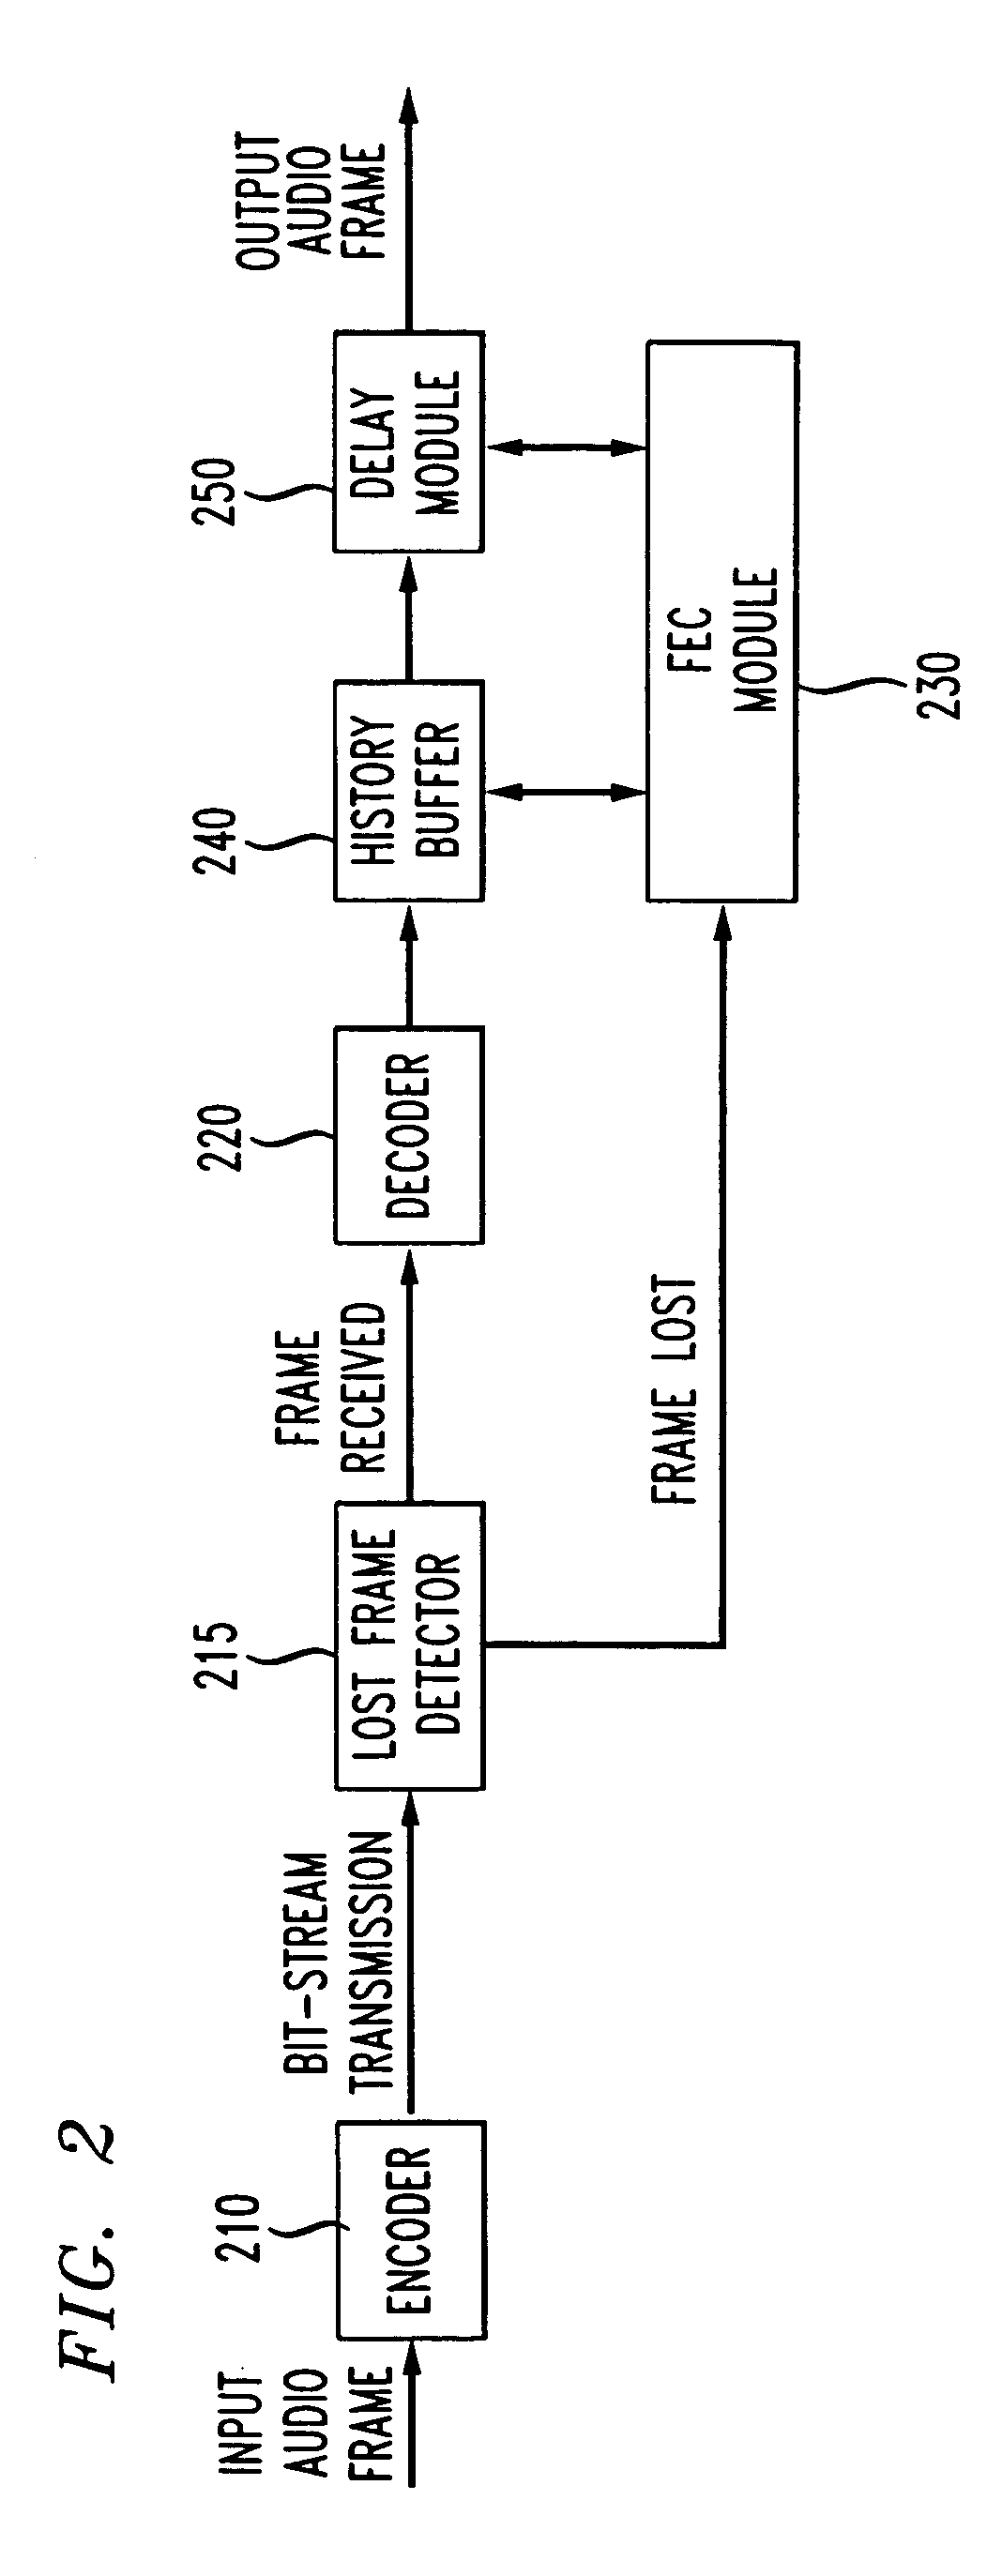 Method and apparatus for performing packet loss or frame erasure concealment